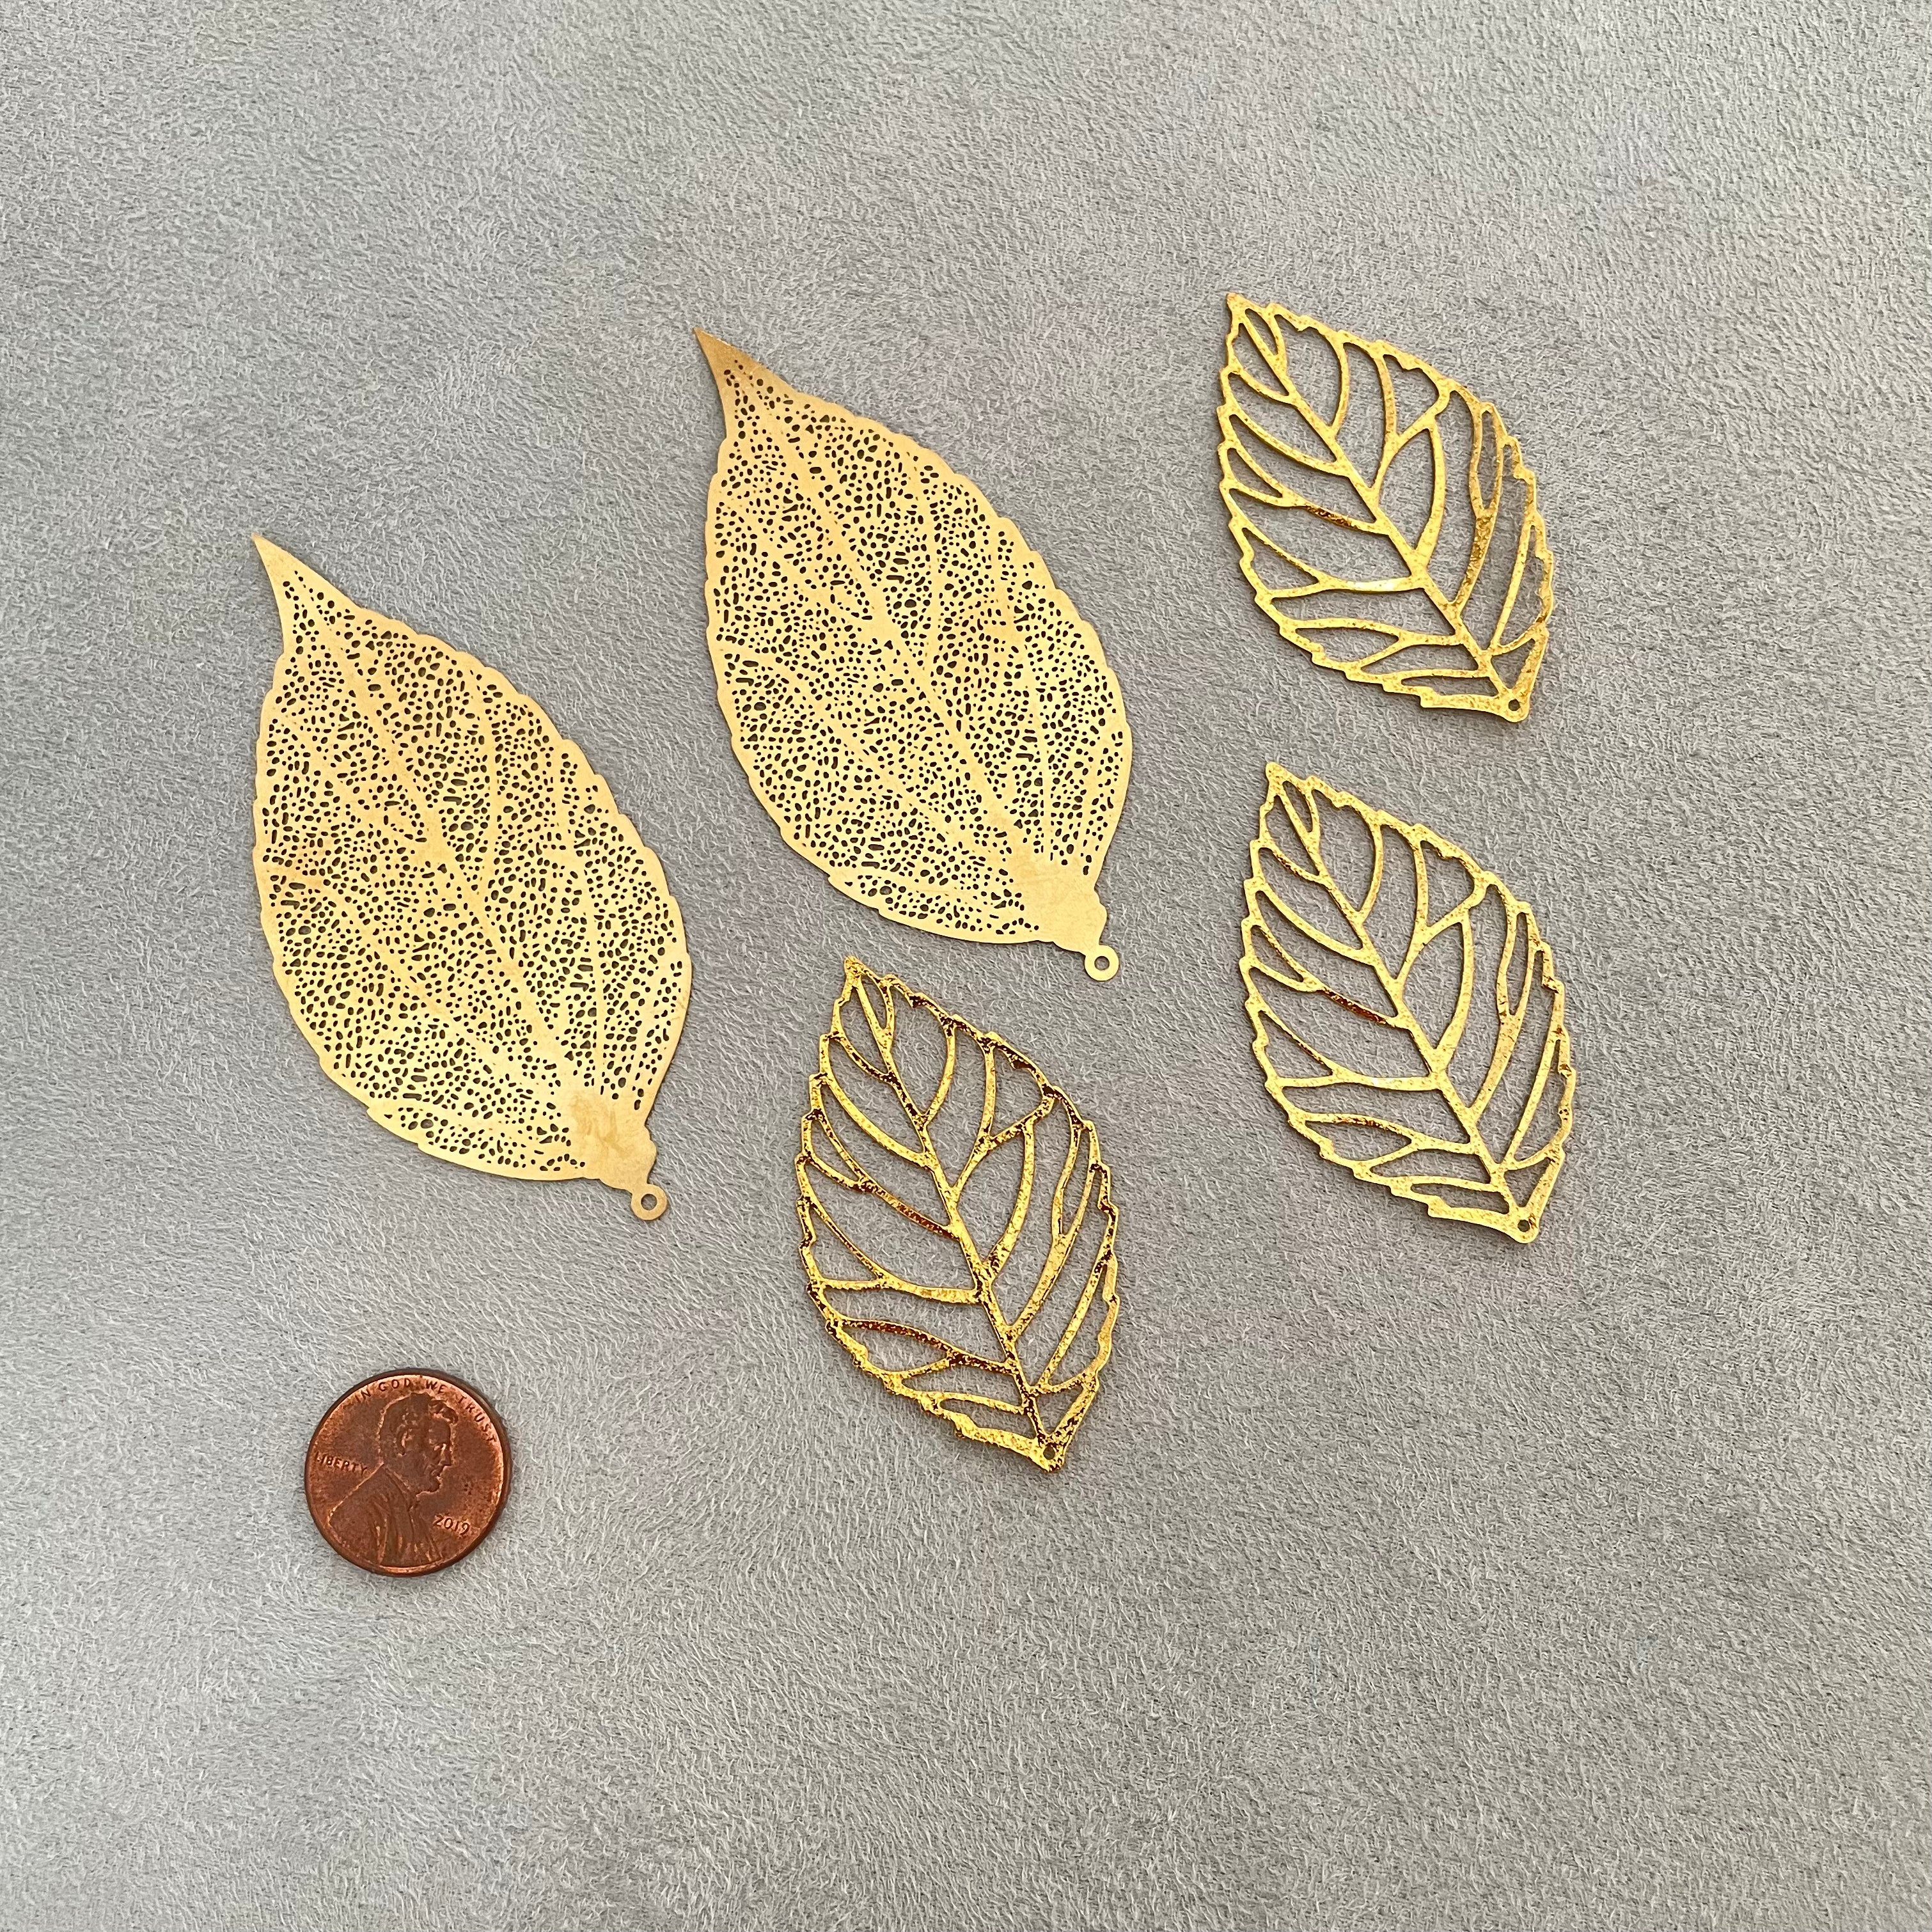 5 styling leaves including 3 gold leaves, 2 gold leaves that are larger, penny beside for size reference  - flat lay props from Champagne & GRIT